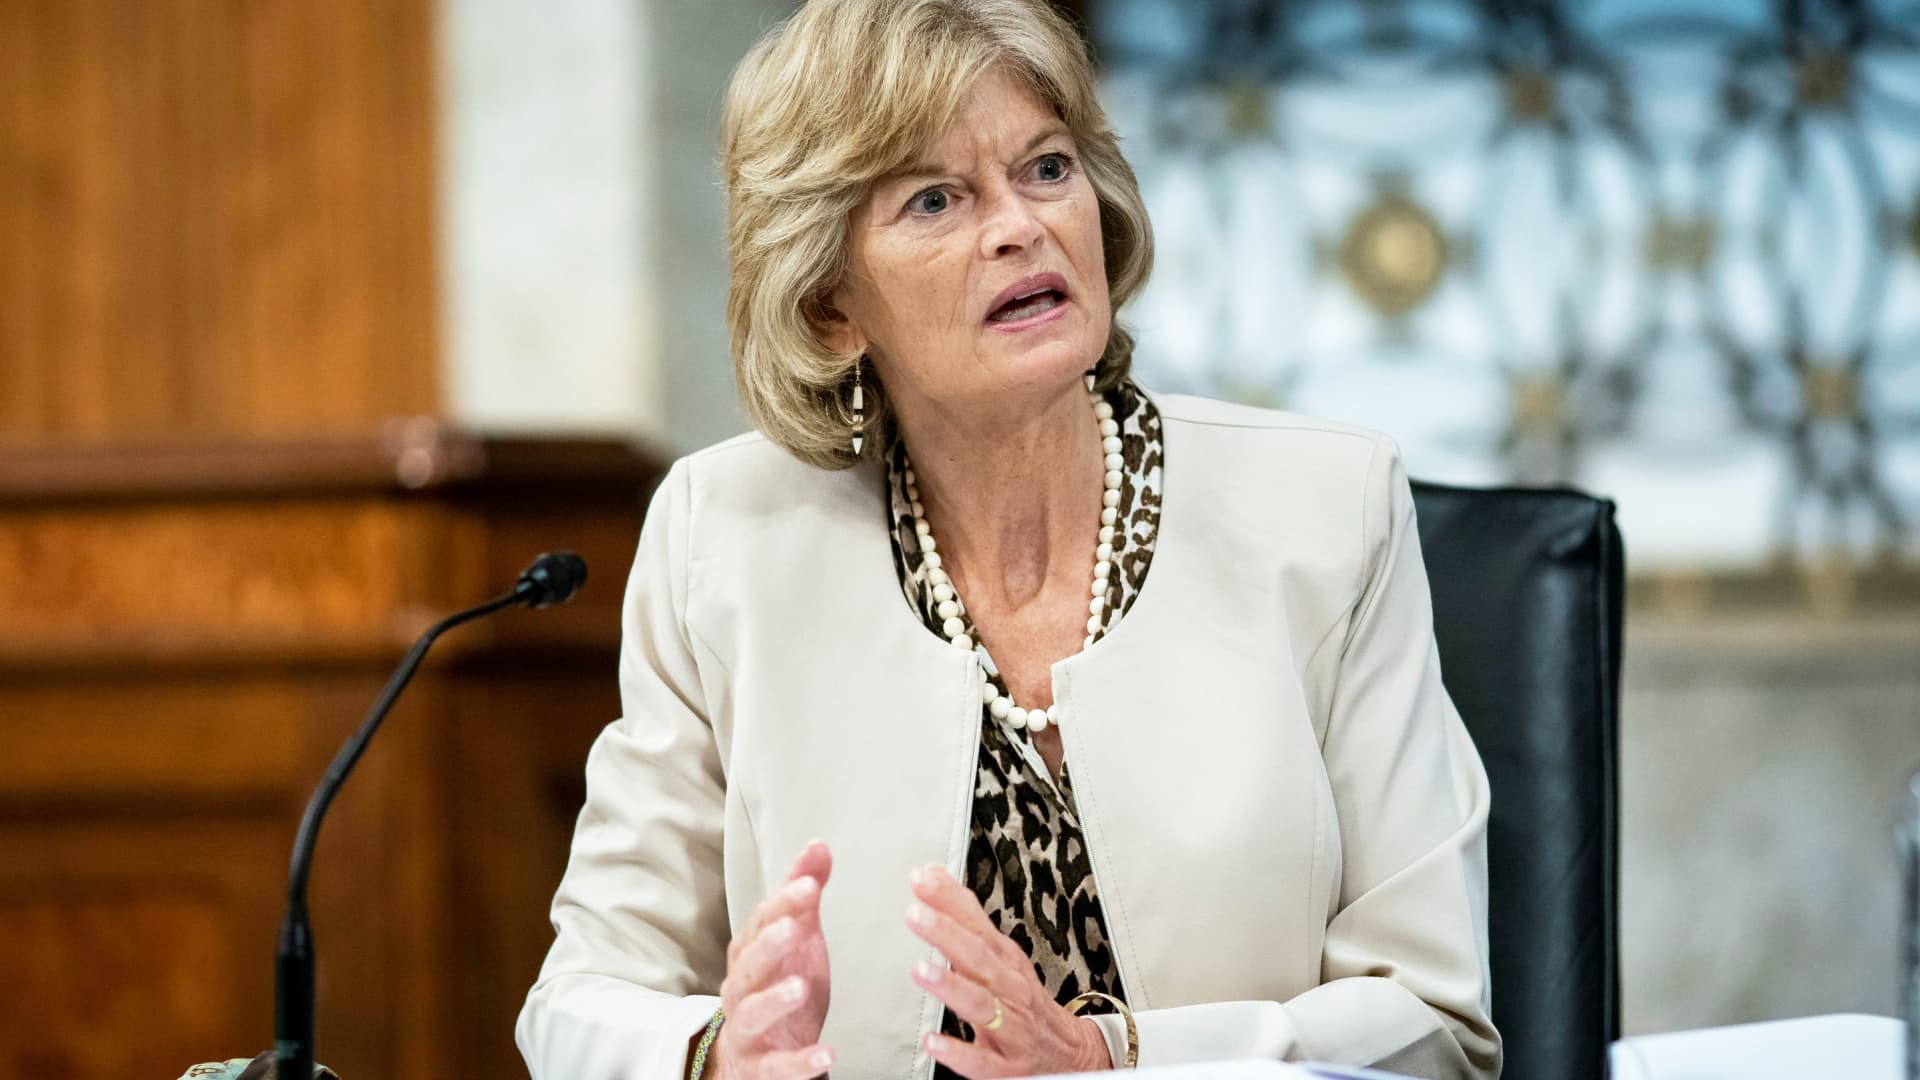 Senator Lisa Murkowski, a Republican from Alaska, speaks during a Senate Health, Education, Labor and Pensions Committee hearing on efforts to get back to work and school during the coronavirus disease (COVID-19) outbreak, in Washington, D.C., June 30, 2020.